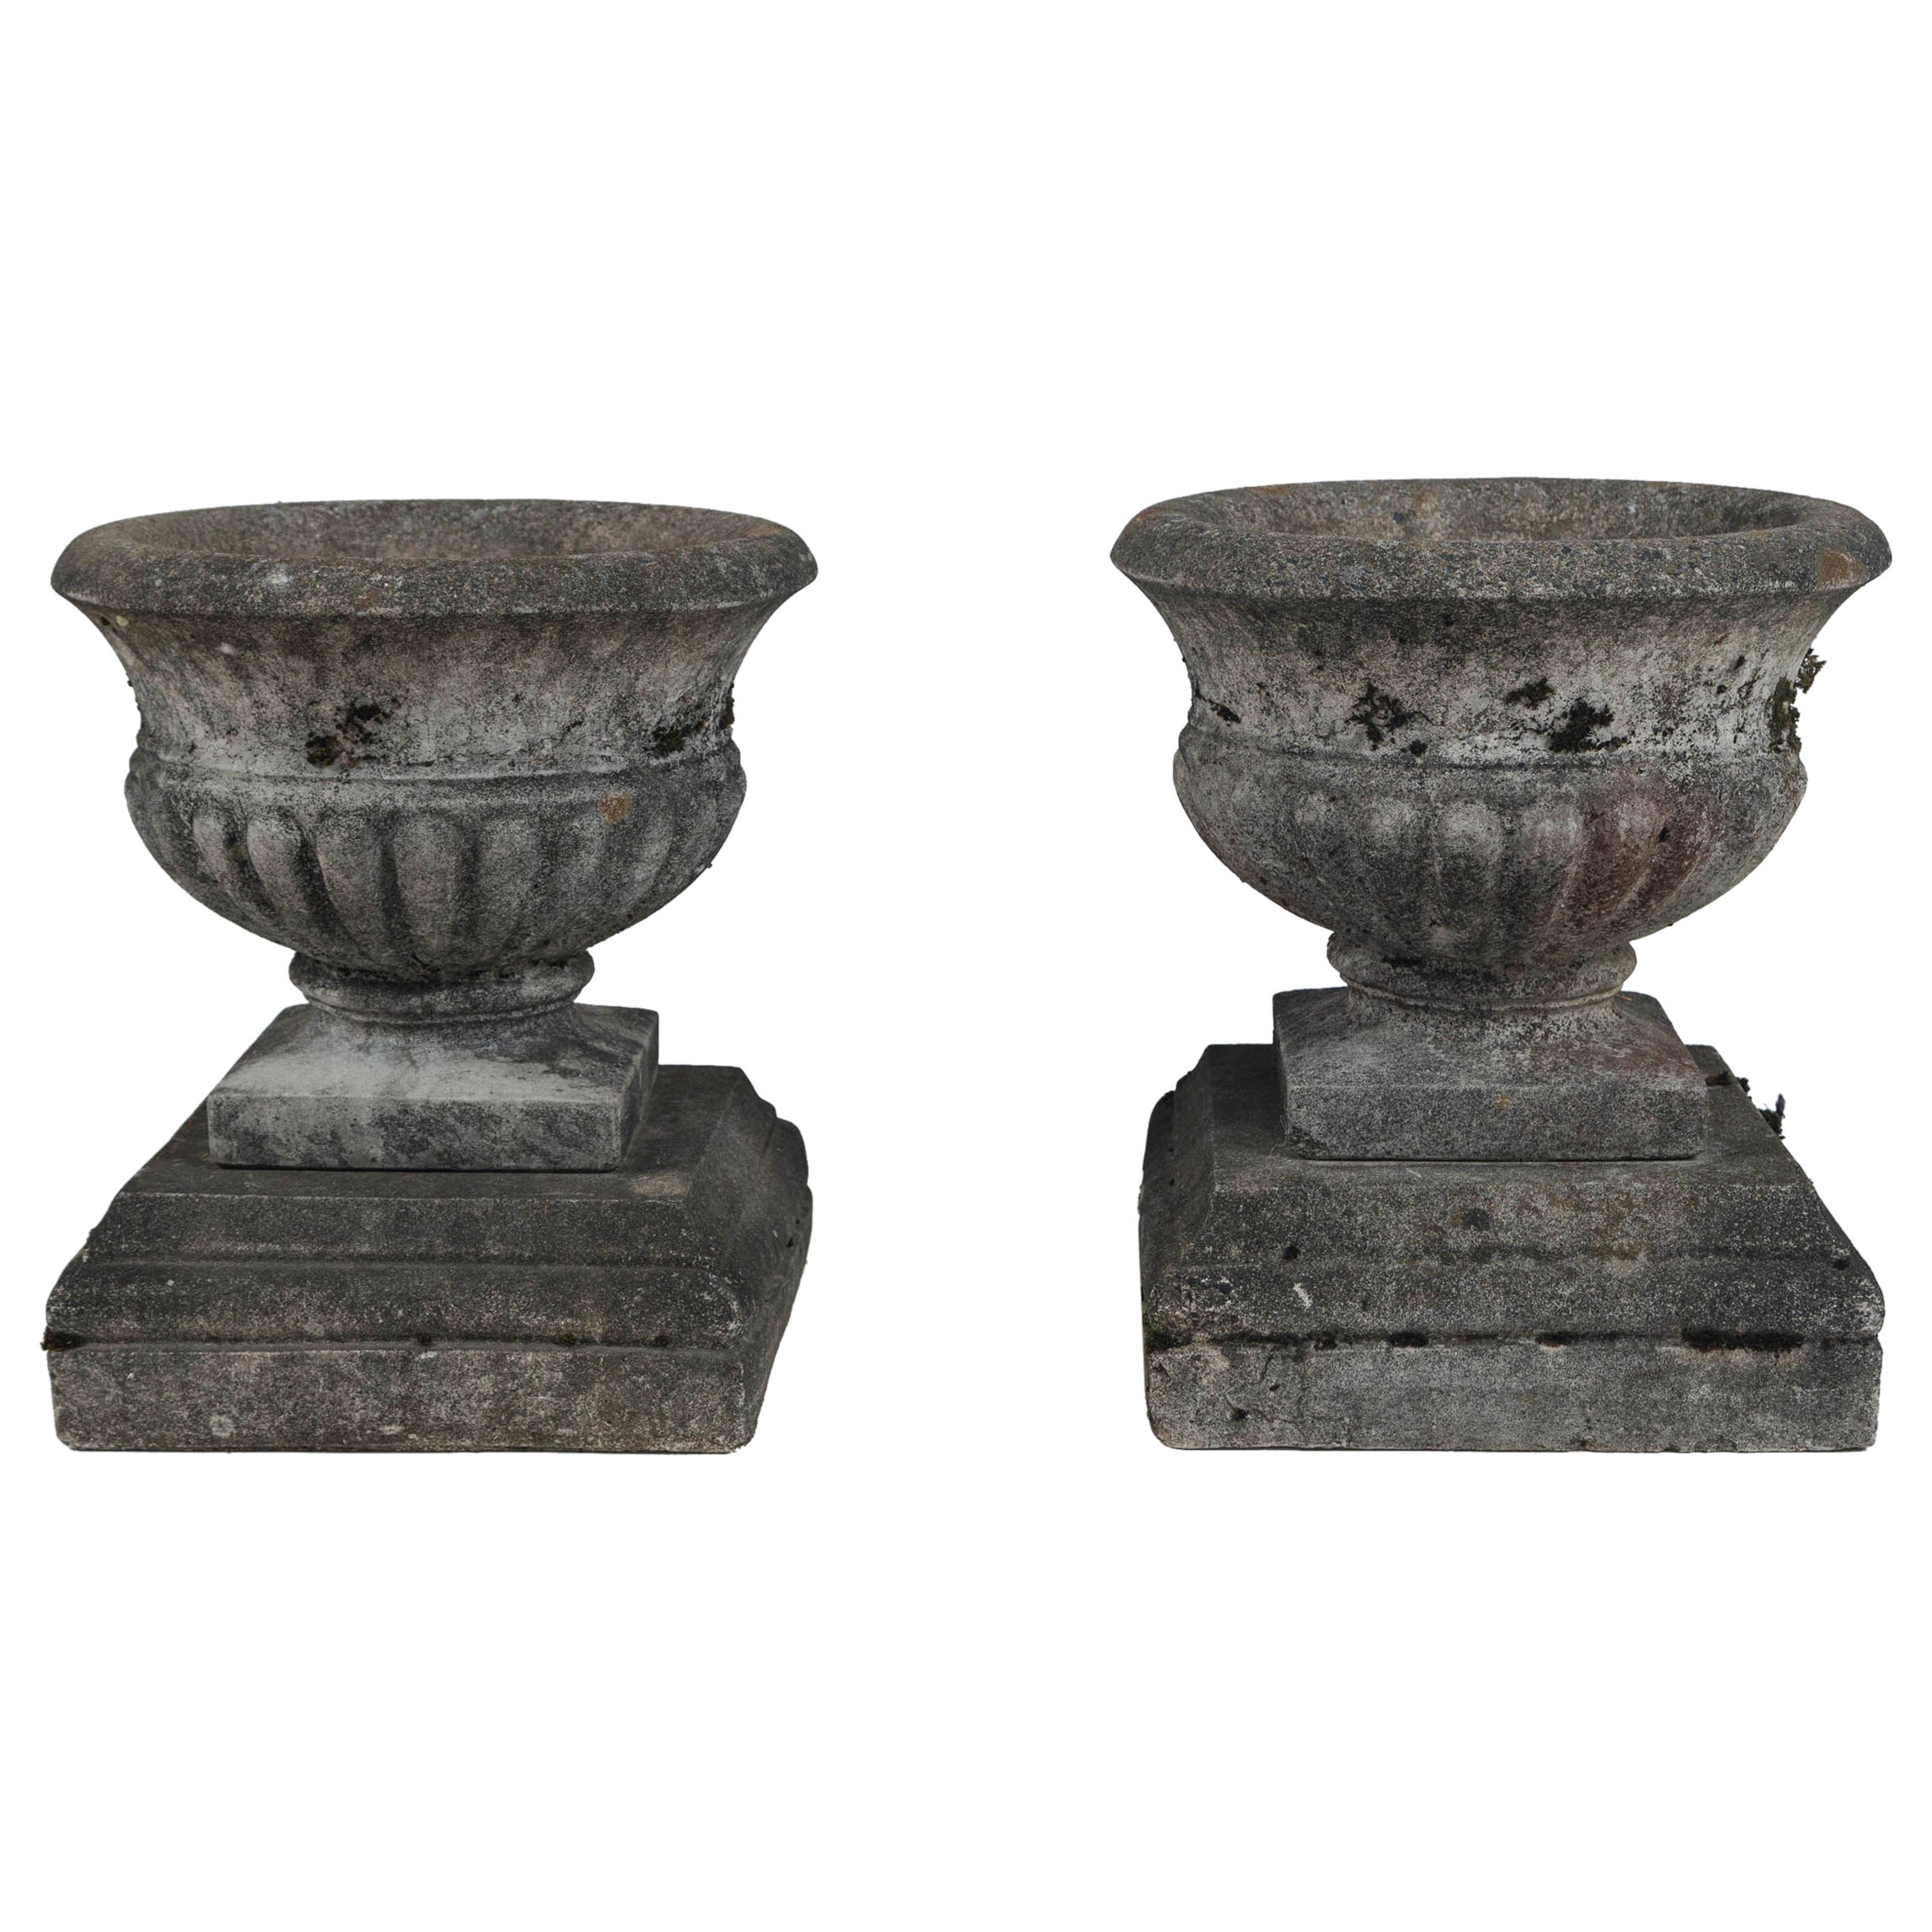 Pair of Antique Cast Stone Garden Urns on Bases, circa 1920